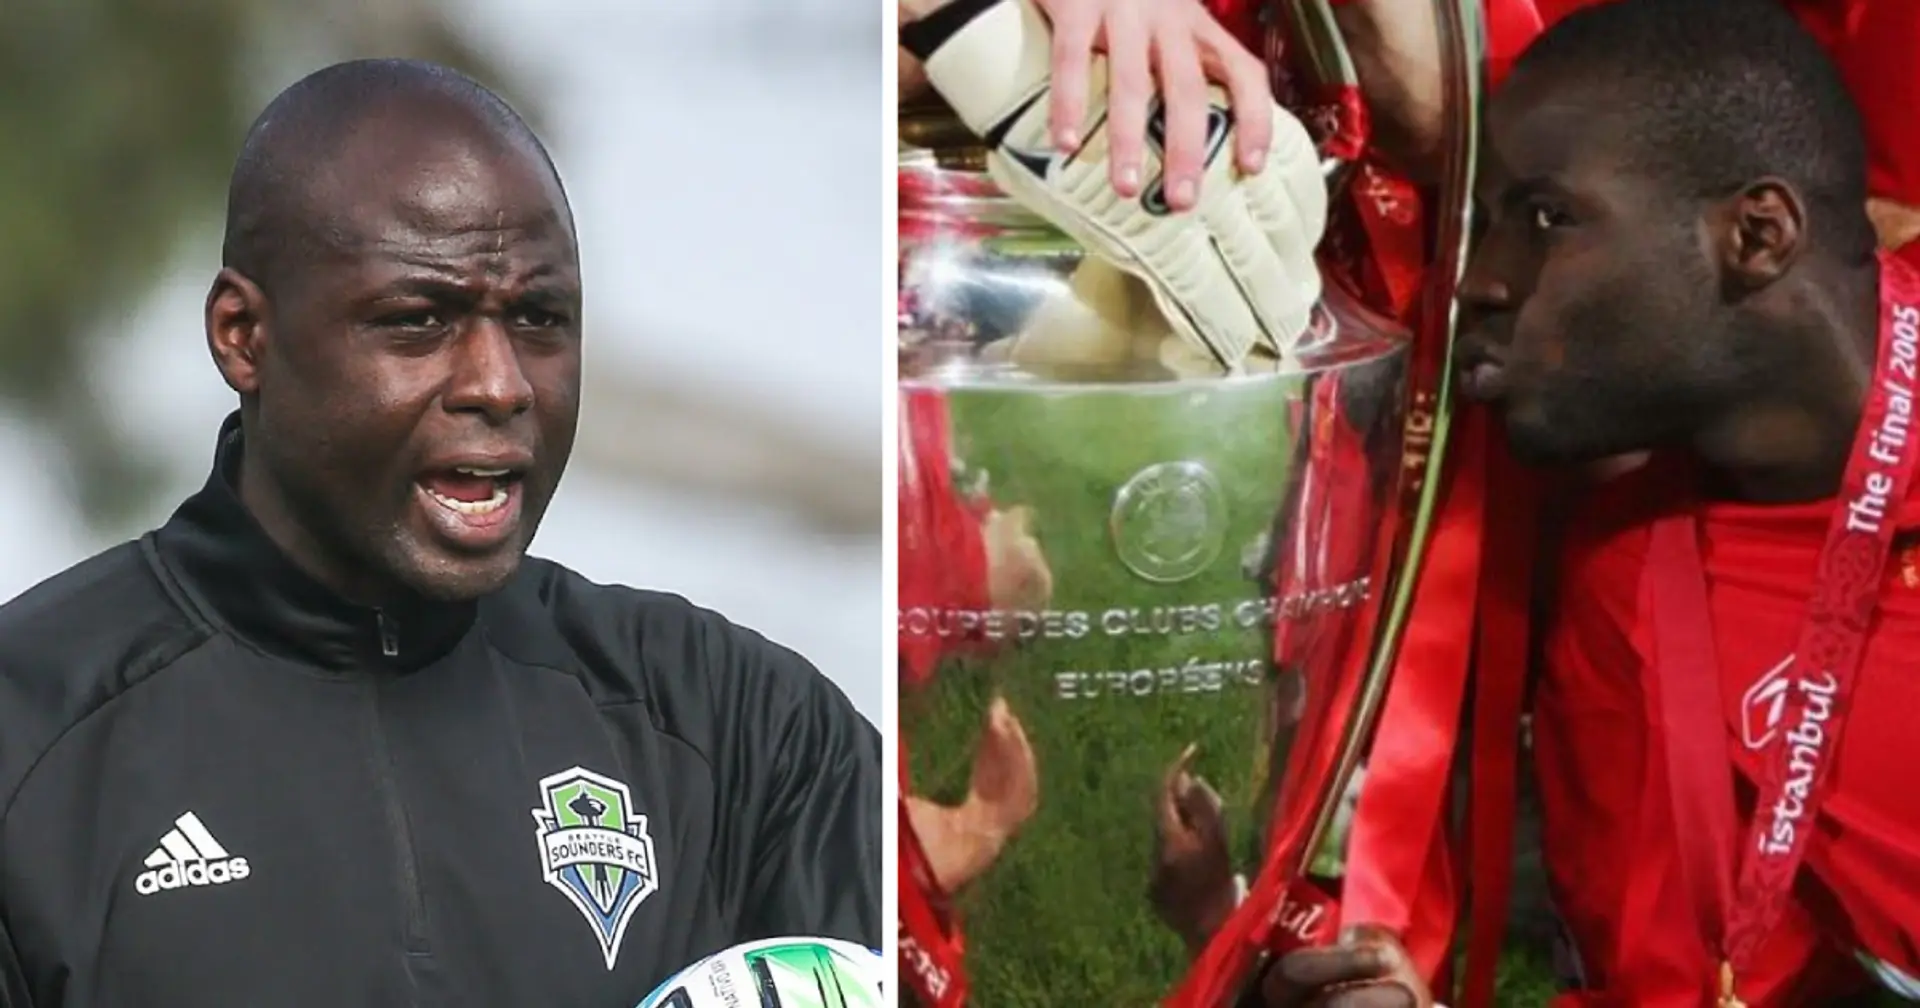 Where is Champions League winner Djimi Traore now? - You asked, we answered